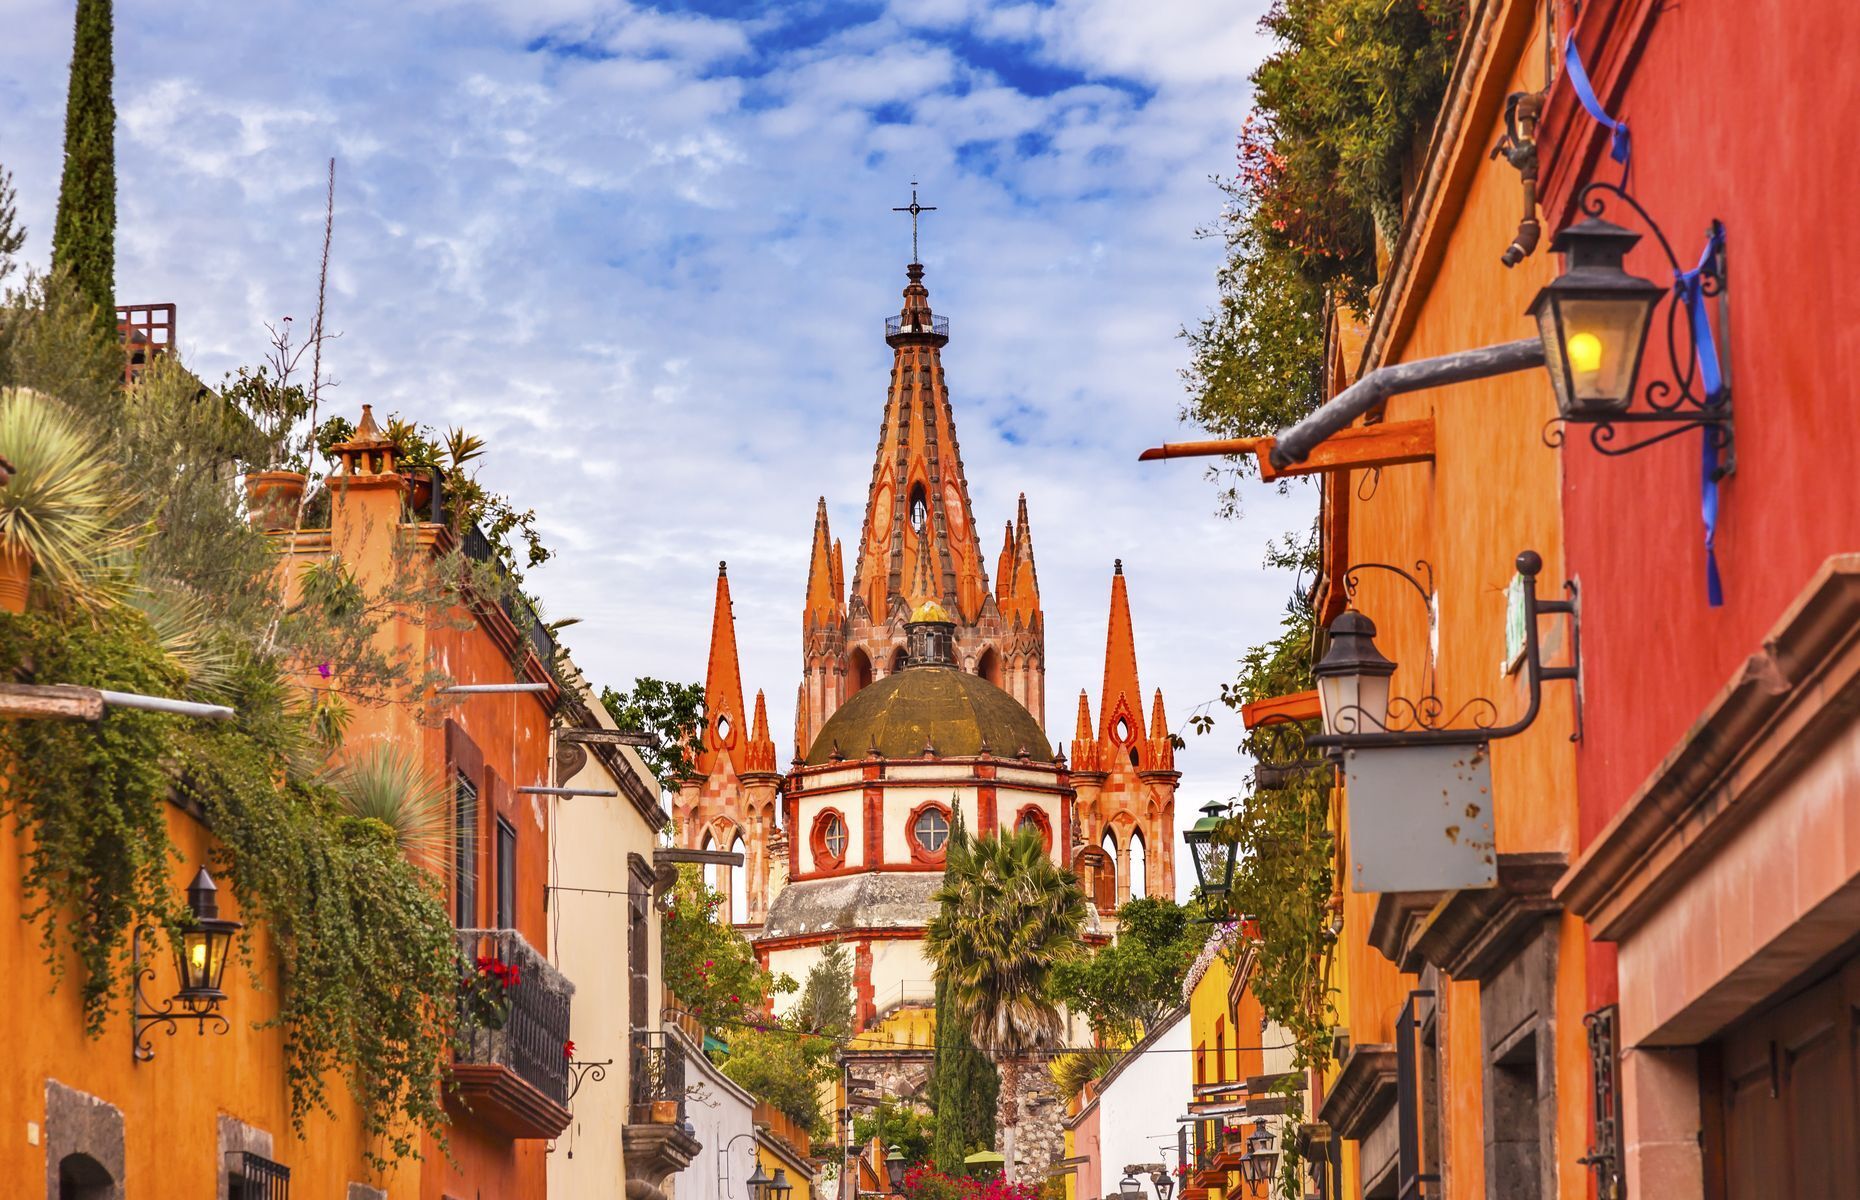 <p>Often compared to Andalusia for its festive atmosphere, <a href="https://visitsanmiguel.travel/0eng/historia2.php" rel="noreferrer noopener">San Miguel de Allende</a> is a colonial town listed as an <a href="https://whc.unesco.org/en/list/1274/" rel="noreferrer noopener">UNESCO World Heritage Site</a> and the pride of Mexico. Its Spanish-style piazzas, art galleries and up-and-coming restaurants will have you thinking you’re on another continent and wanting to come back again and again. Stroll along Calle Aldama and visit the <a href="https://www.sanmiguelarcangelsma.org/homepage" rel="noreferrer noopener">Parroquia de San Miguel Arcángel</a> with its pink cathedral, and you’ll be sold.</p>